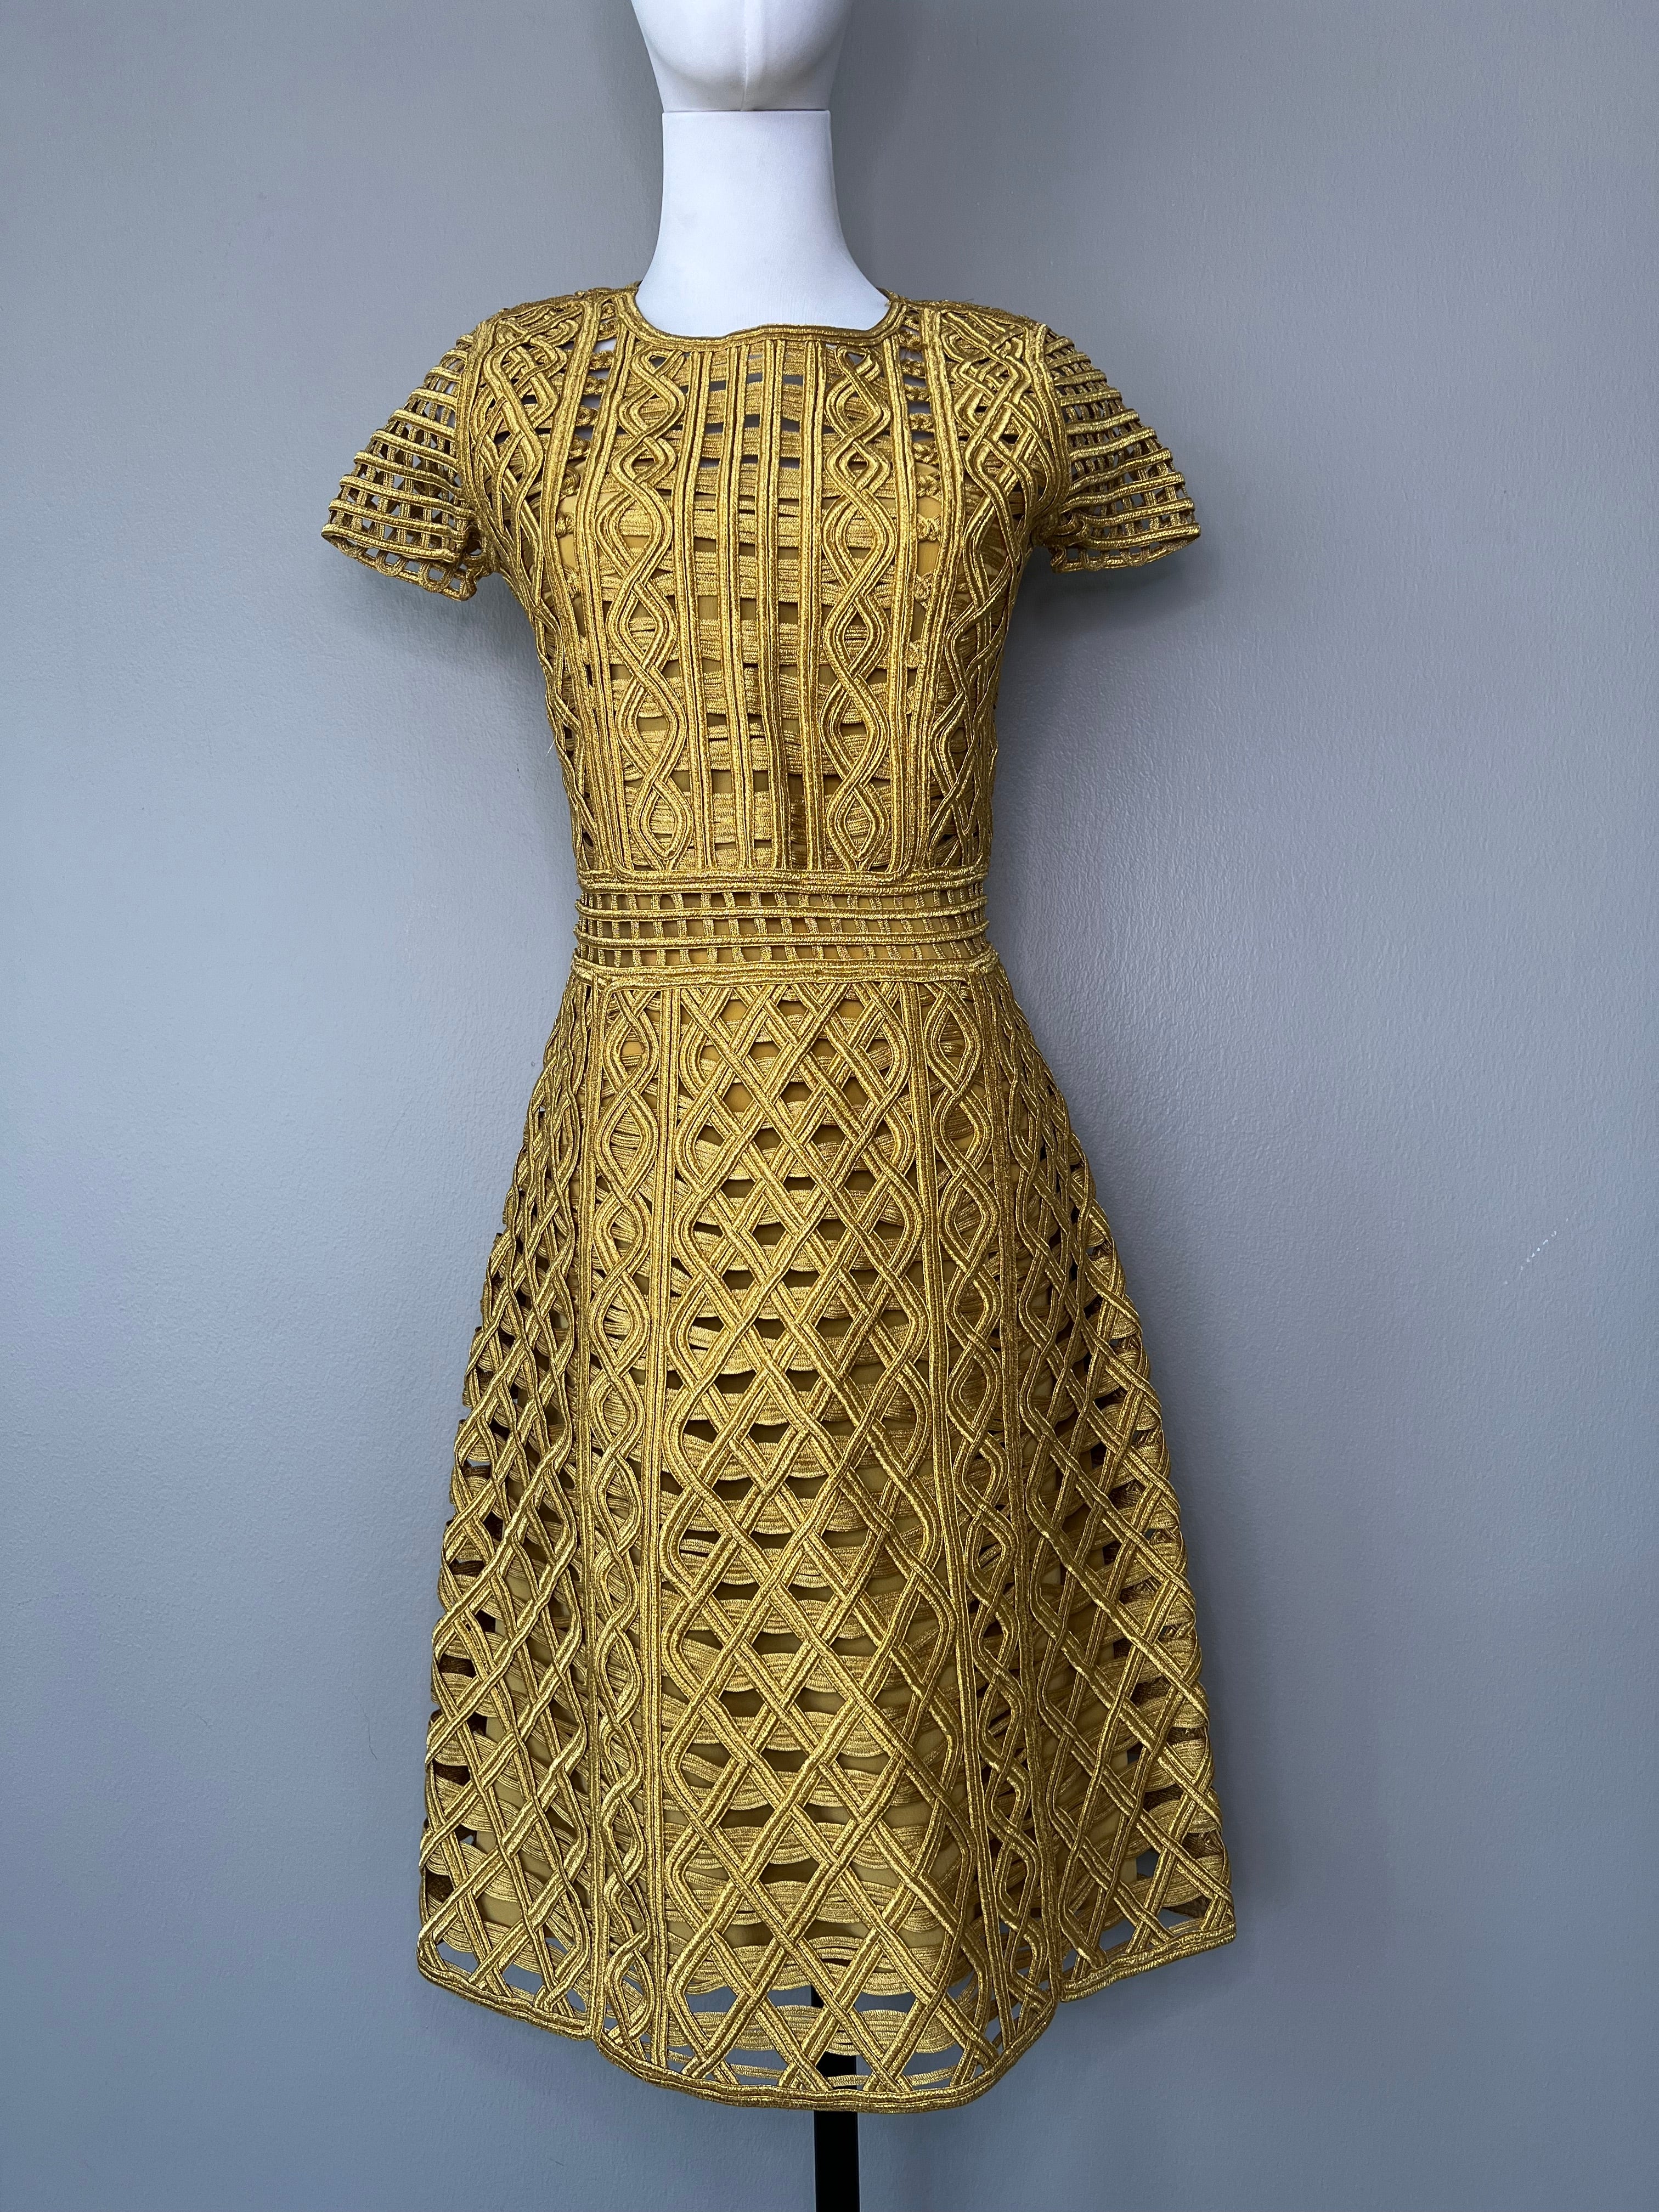 Gold pattern royalty dress with undergarment - BURBERRY